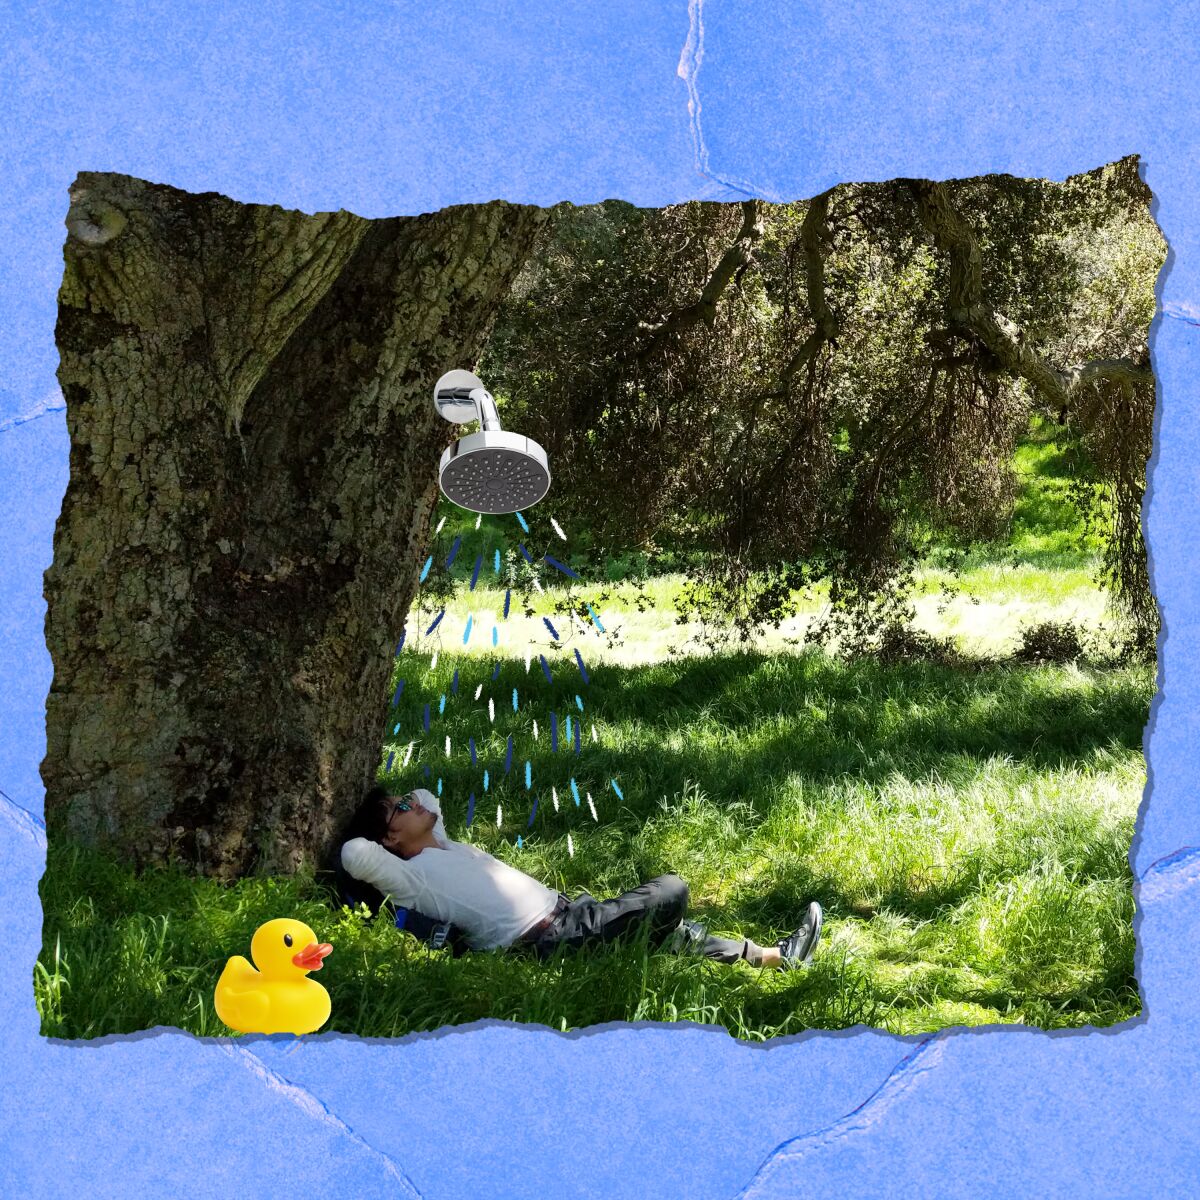 Photo of a person relaxing under a tree with an illustration of a shower head and a rubber ducky.